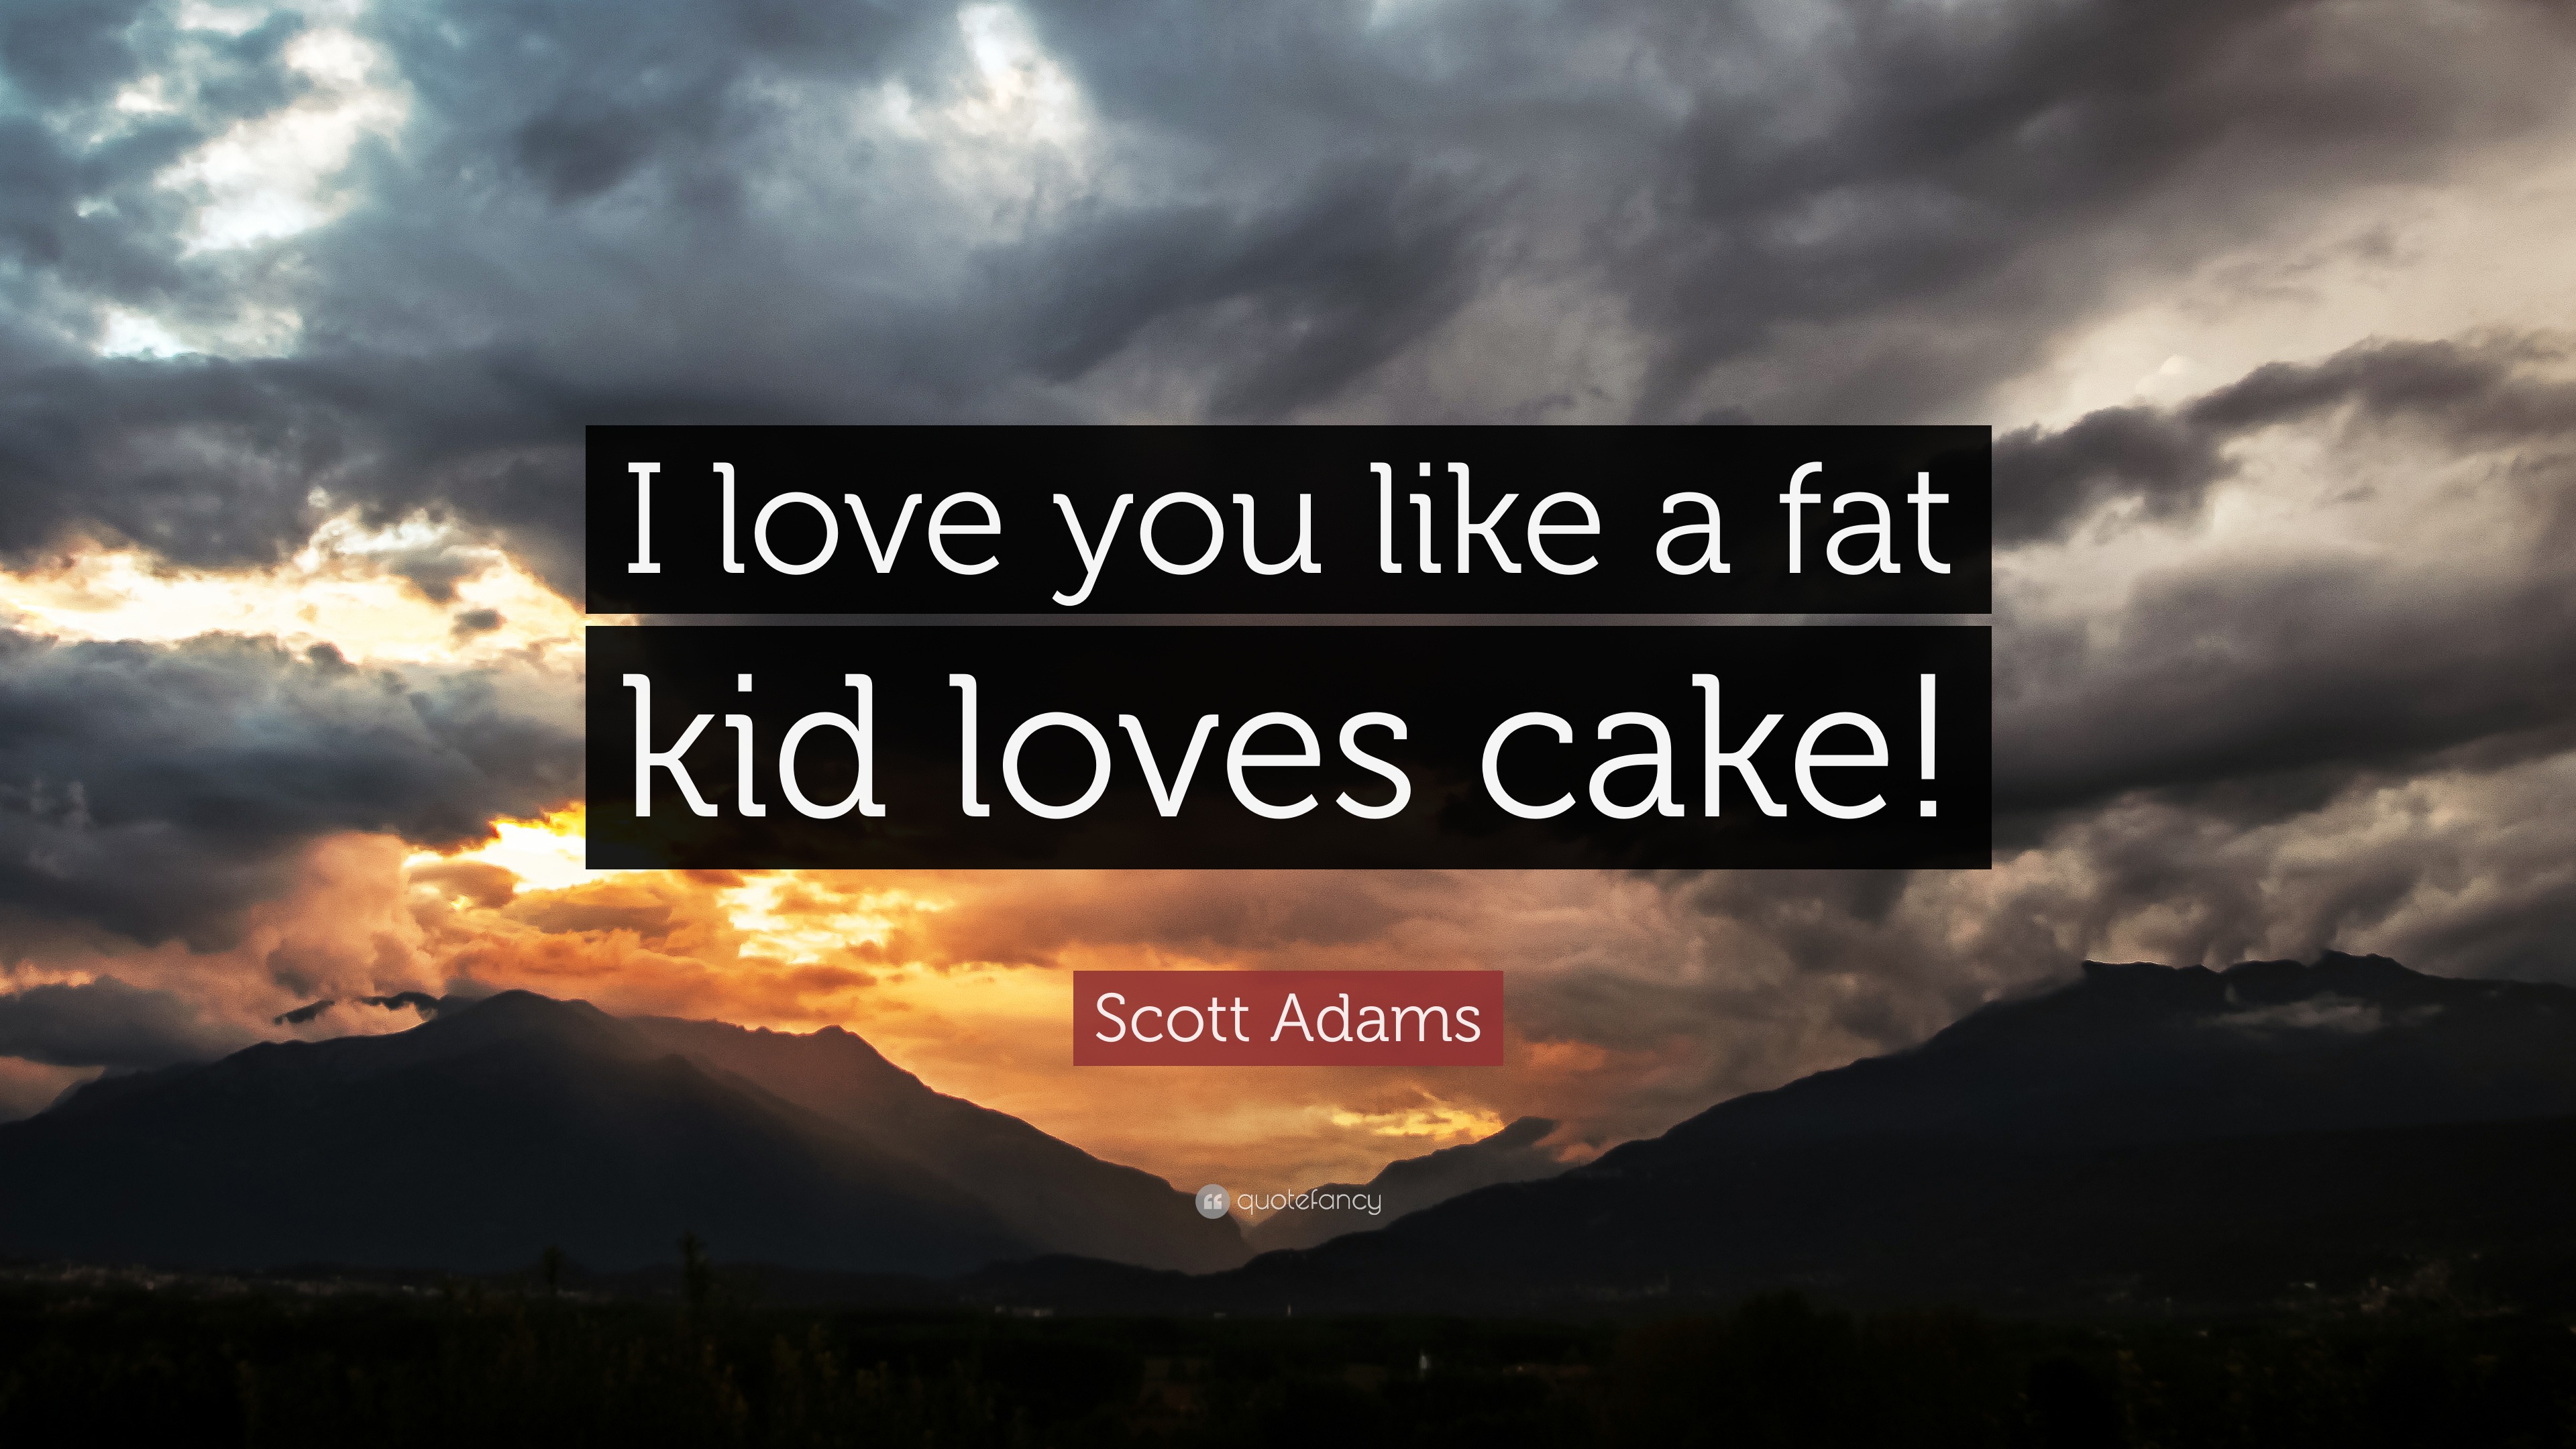 Scott Adams Quote “I love you like a fat kid loves cake ”